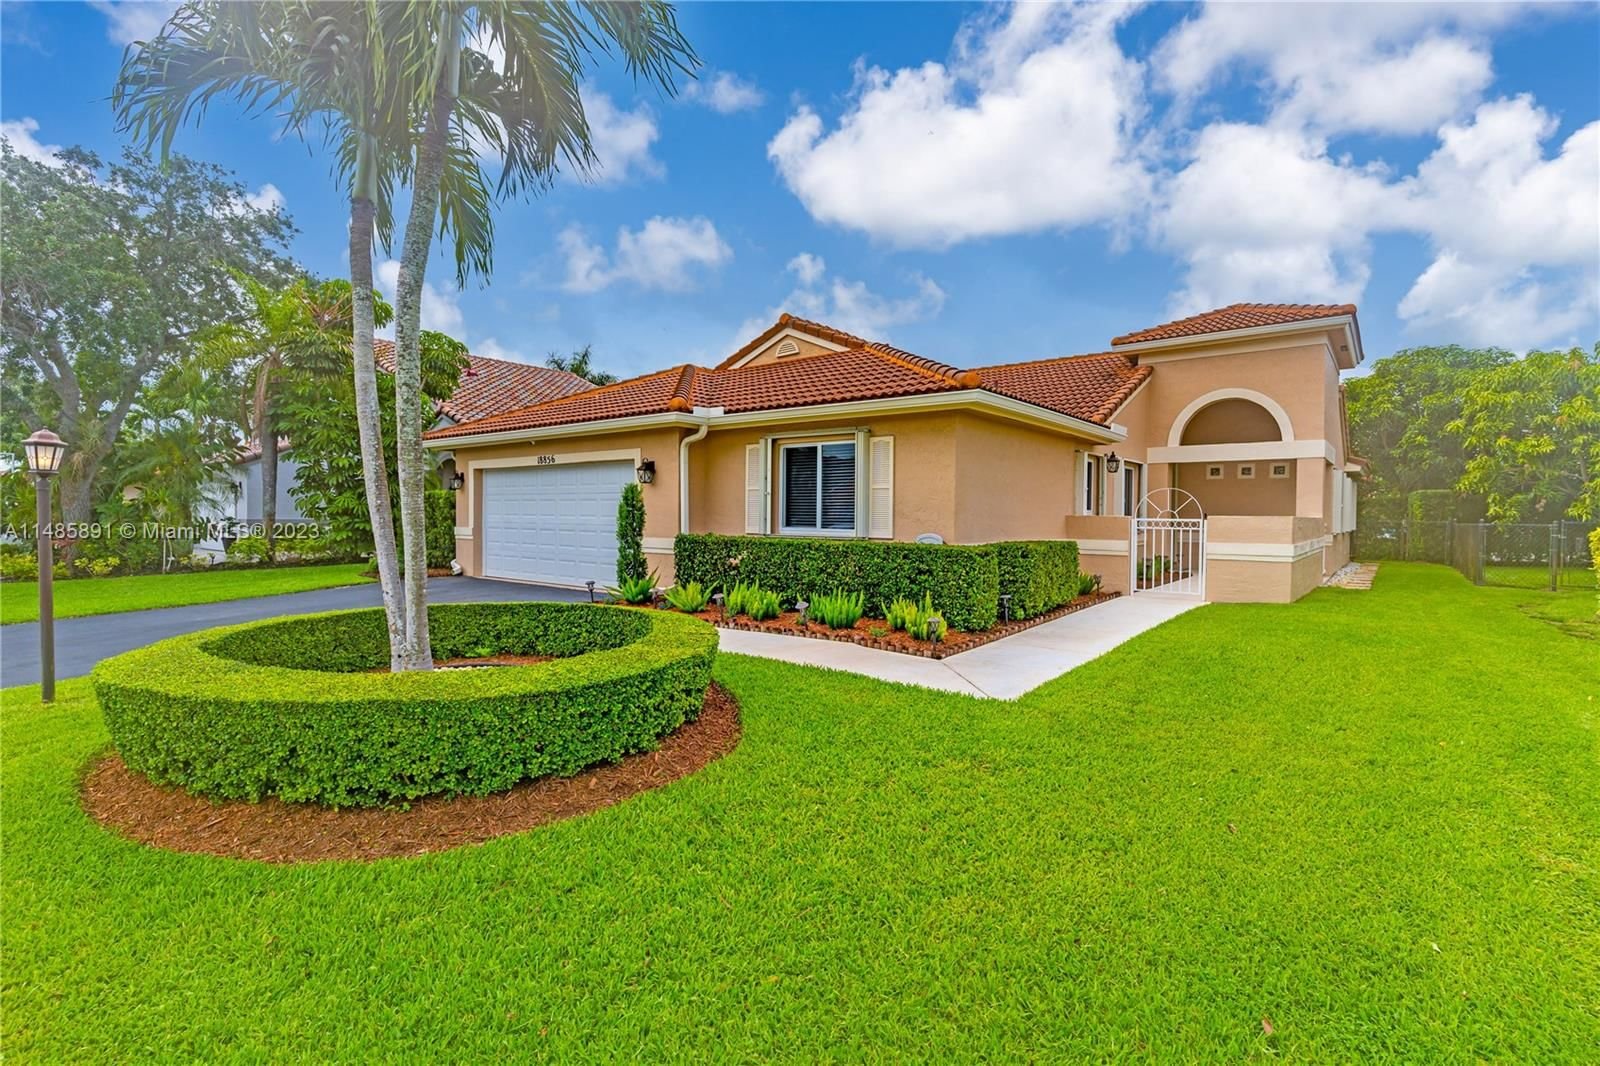 Real estate property located at 18856 2nd St, Broward County, AMERITRAIL SECTION ONE, Pembroke Pines, FL